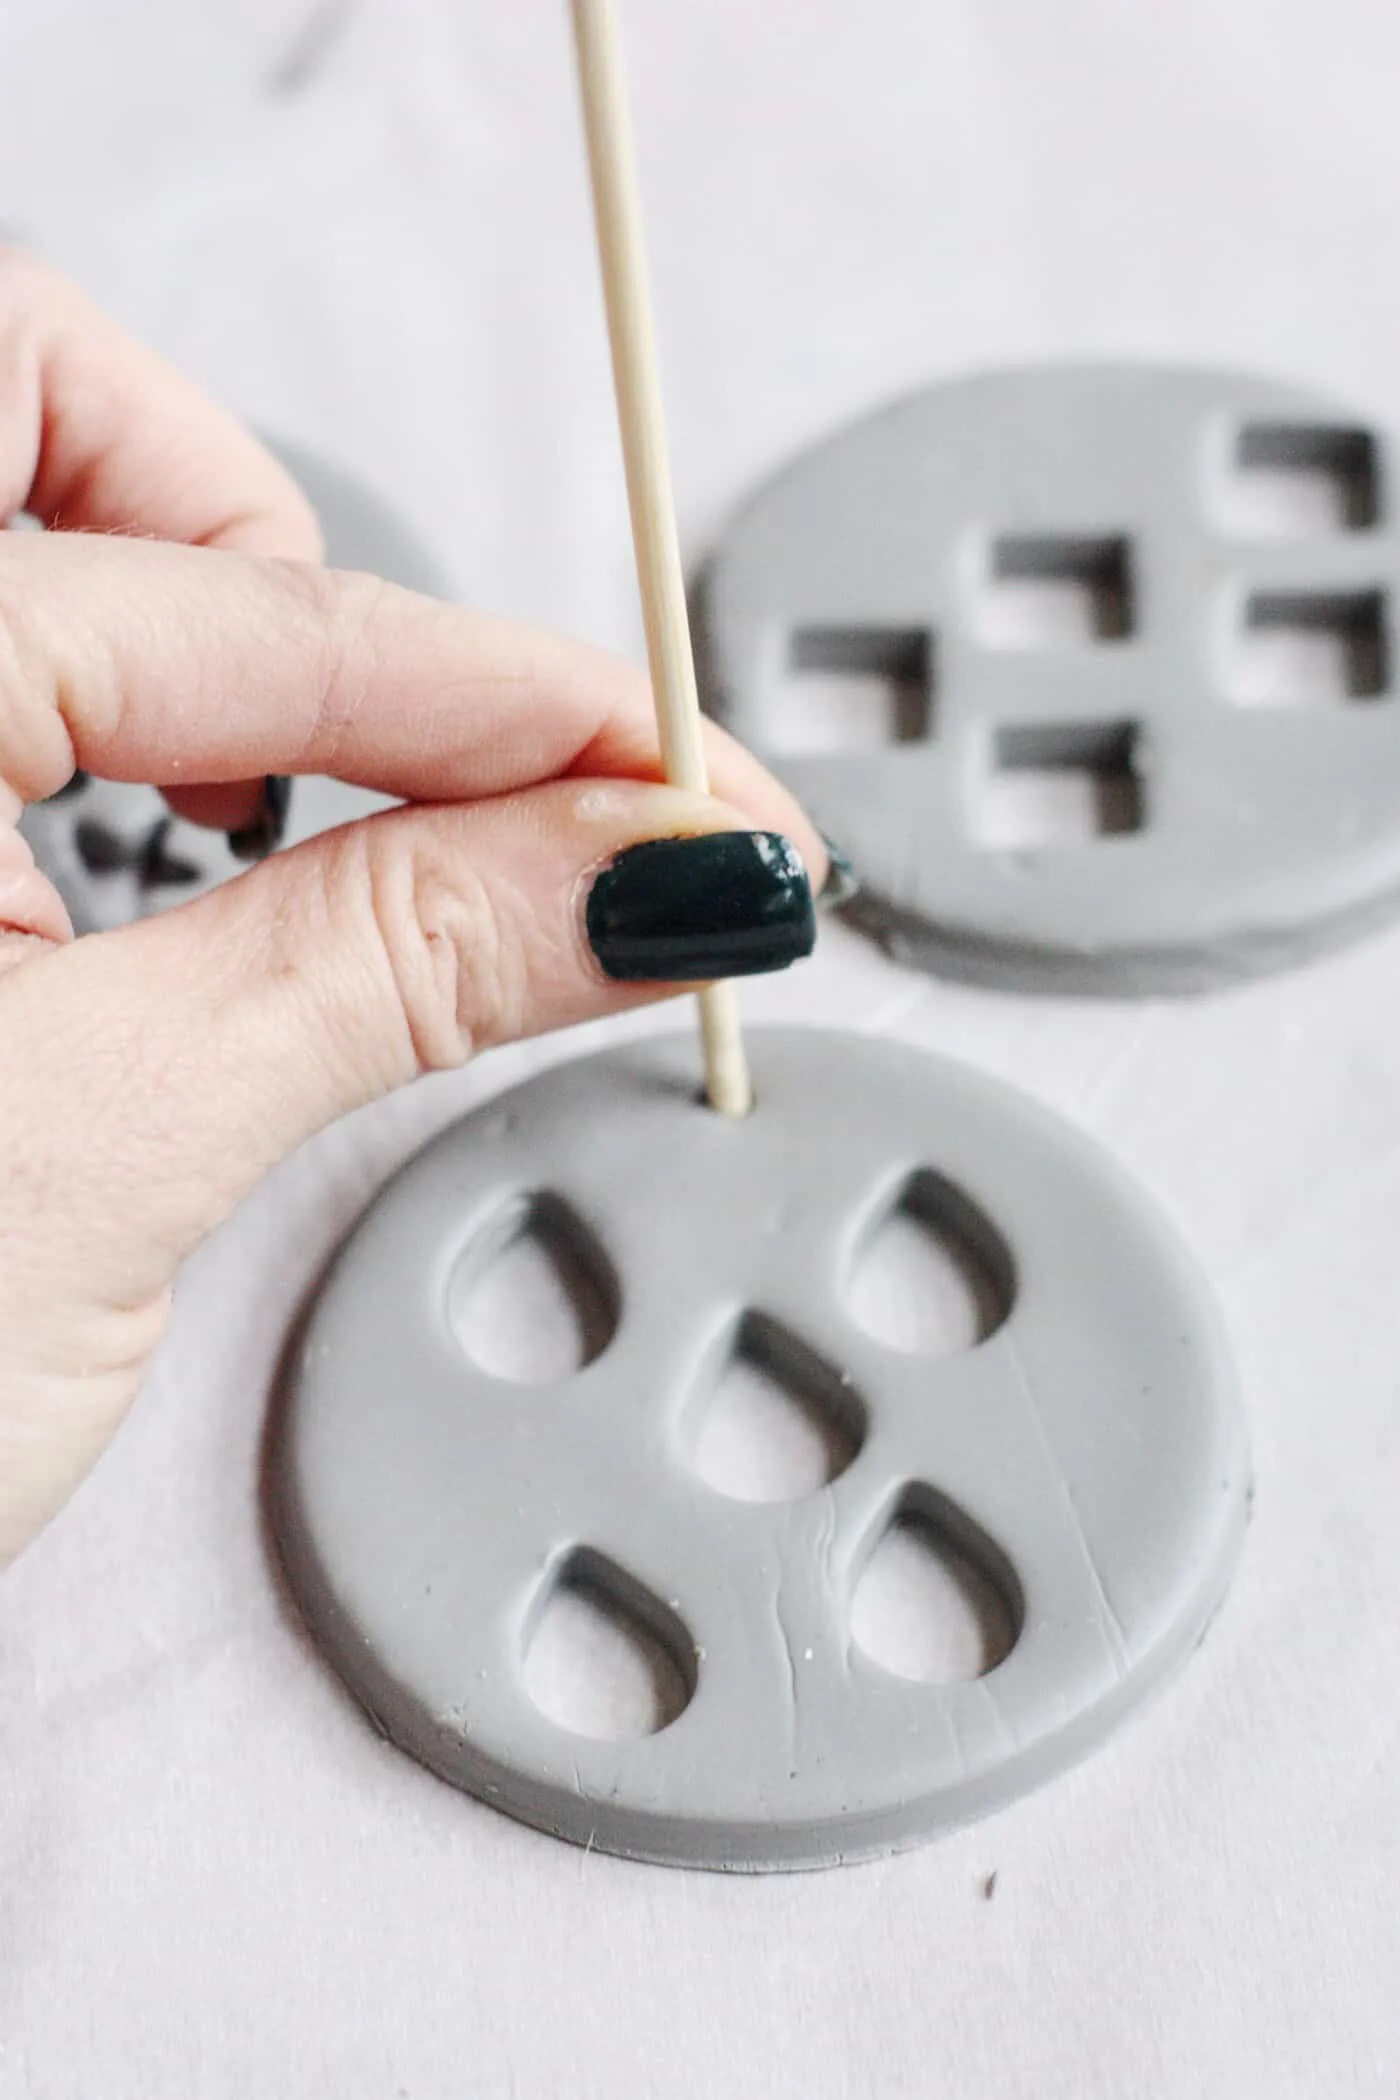 Press a hole into the top of a clay ornament using a skewer